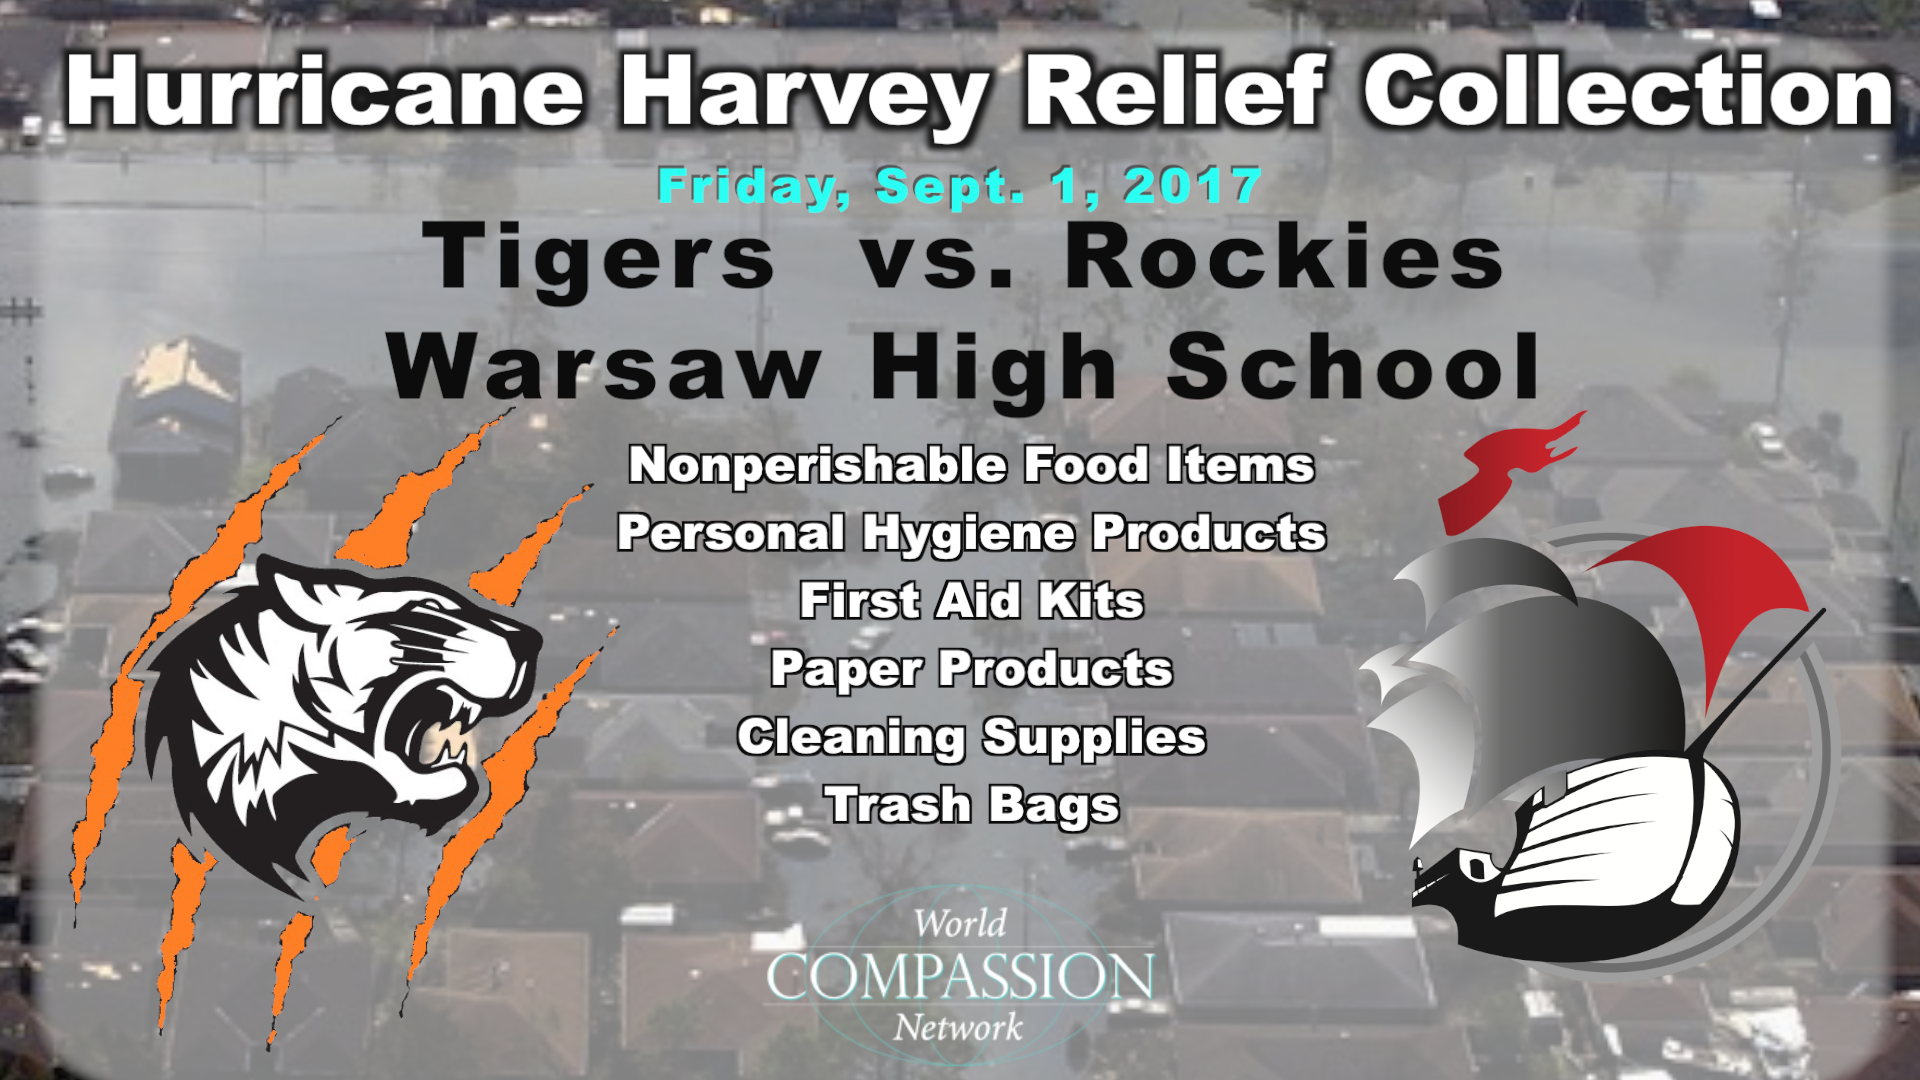 PHS vs. Warsaw Football Game and Hurricane Harvey Relief Collection